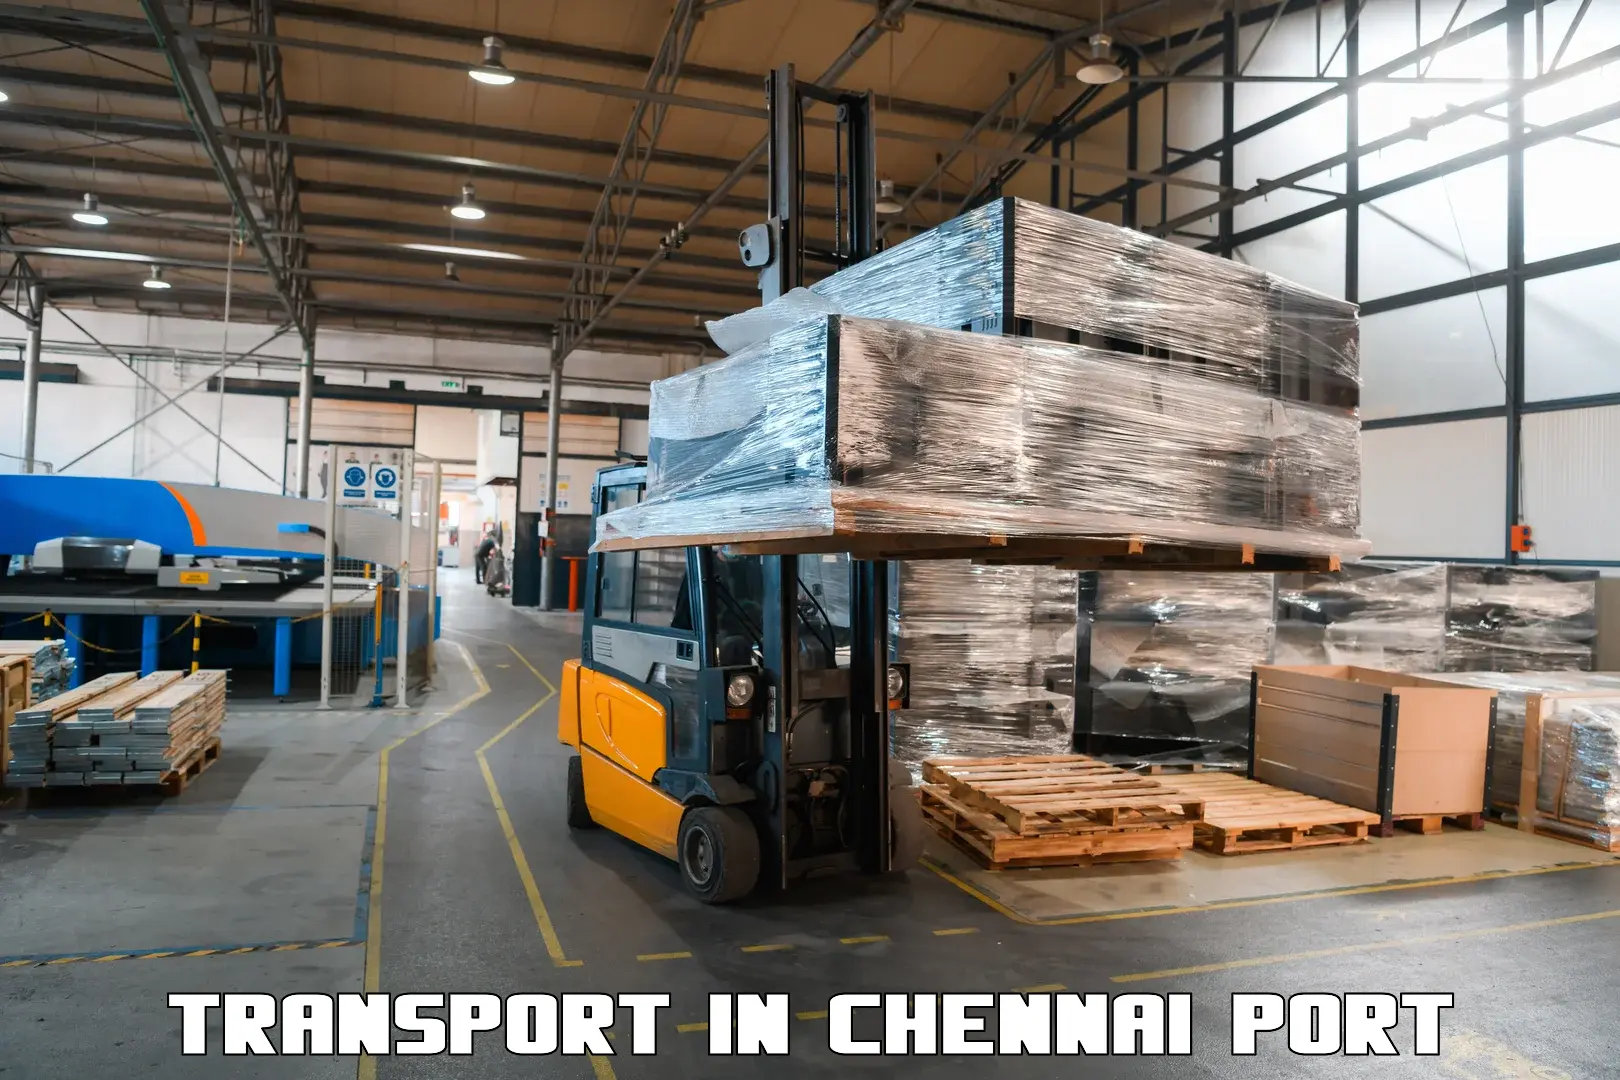 Express transport services in Chennai Port